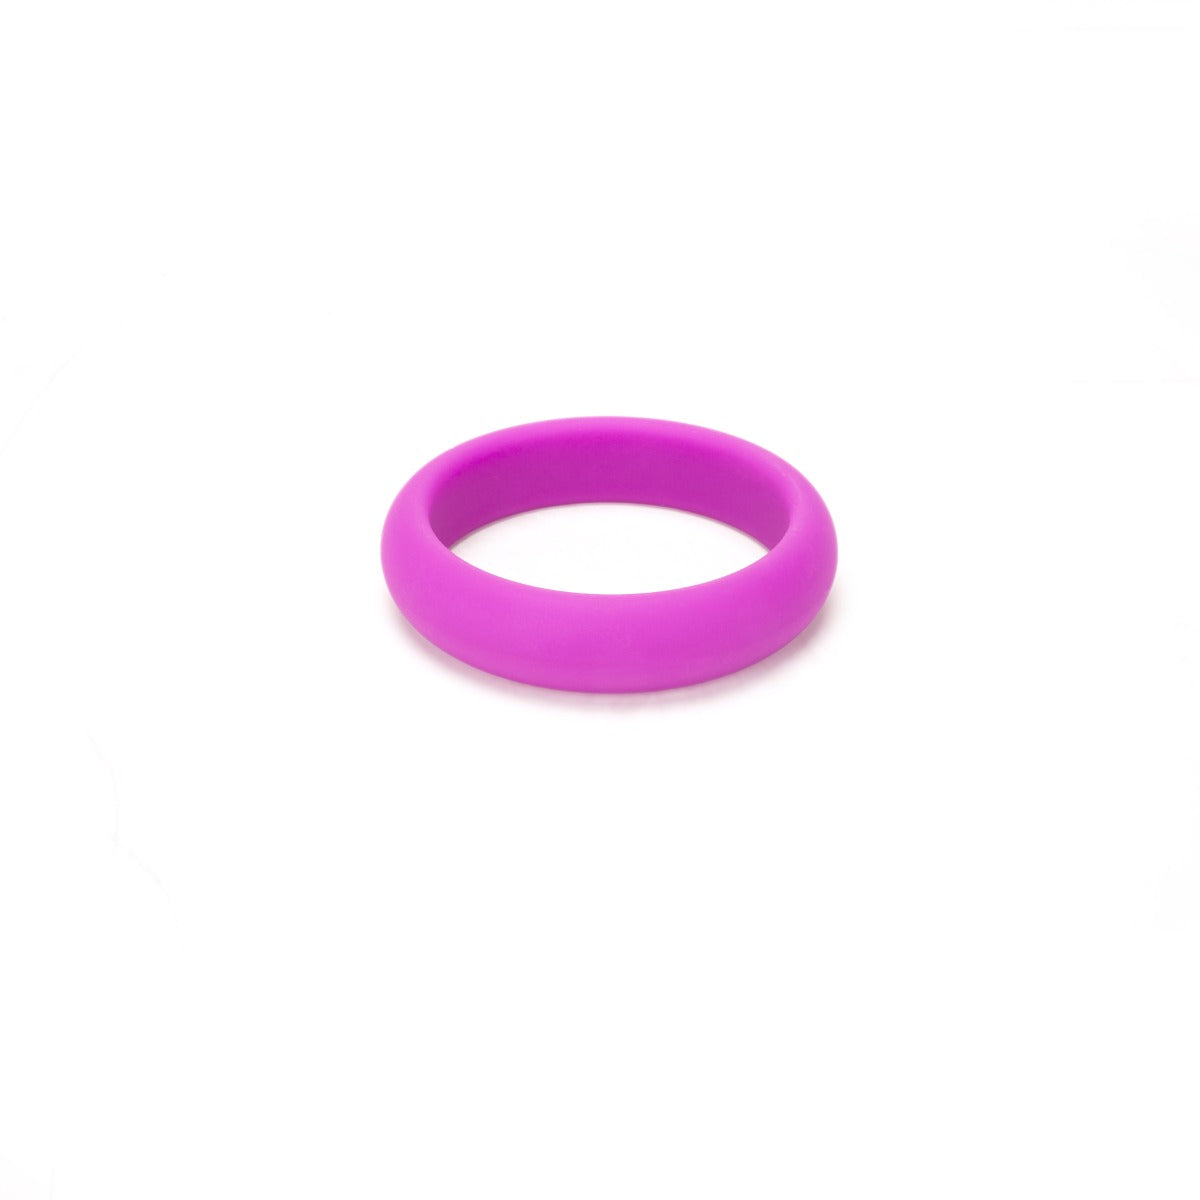 a pink ring on a white background